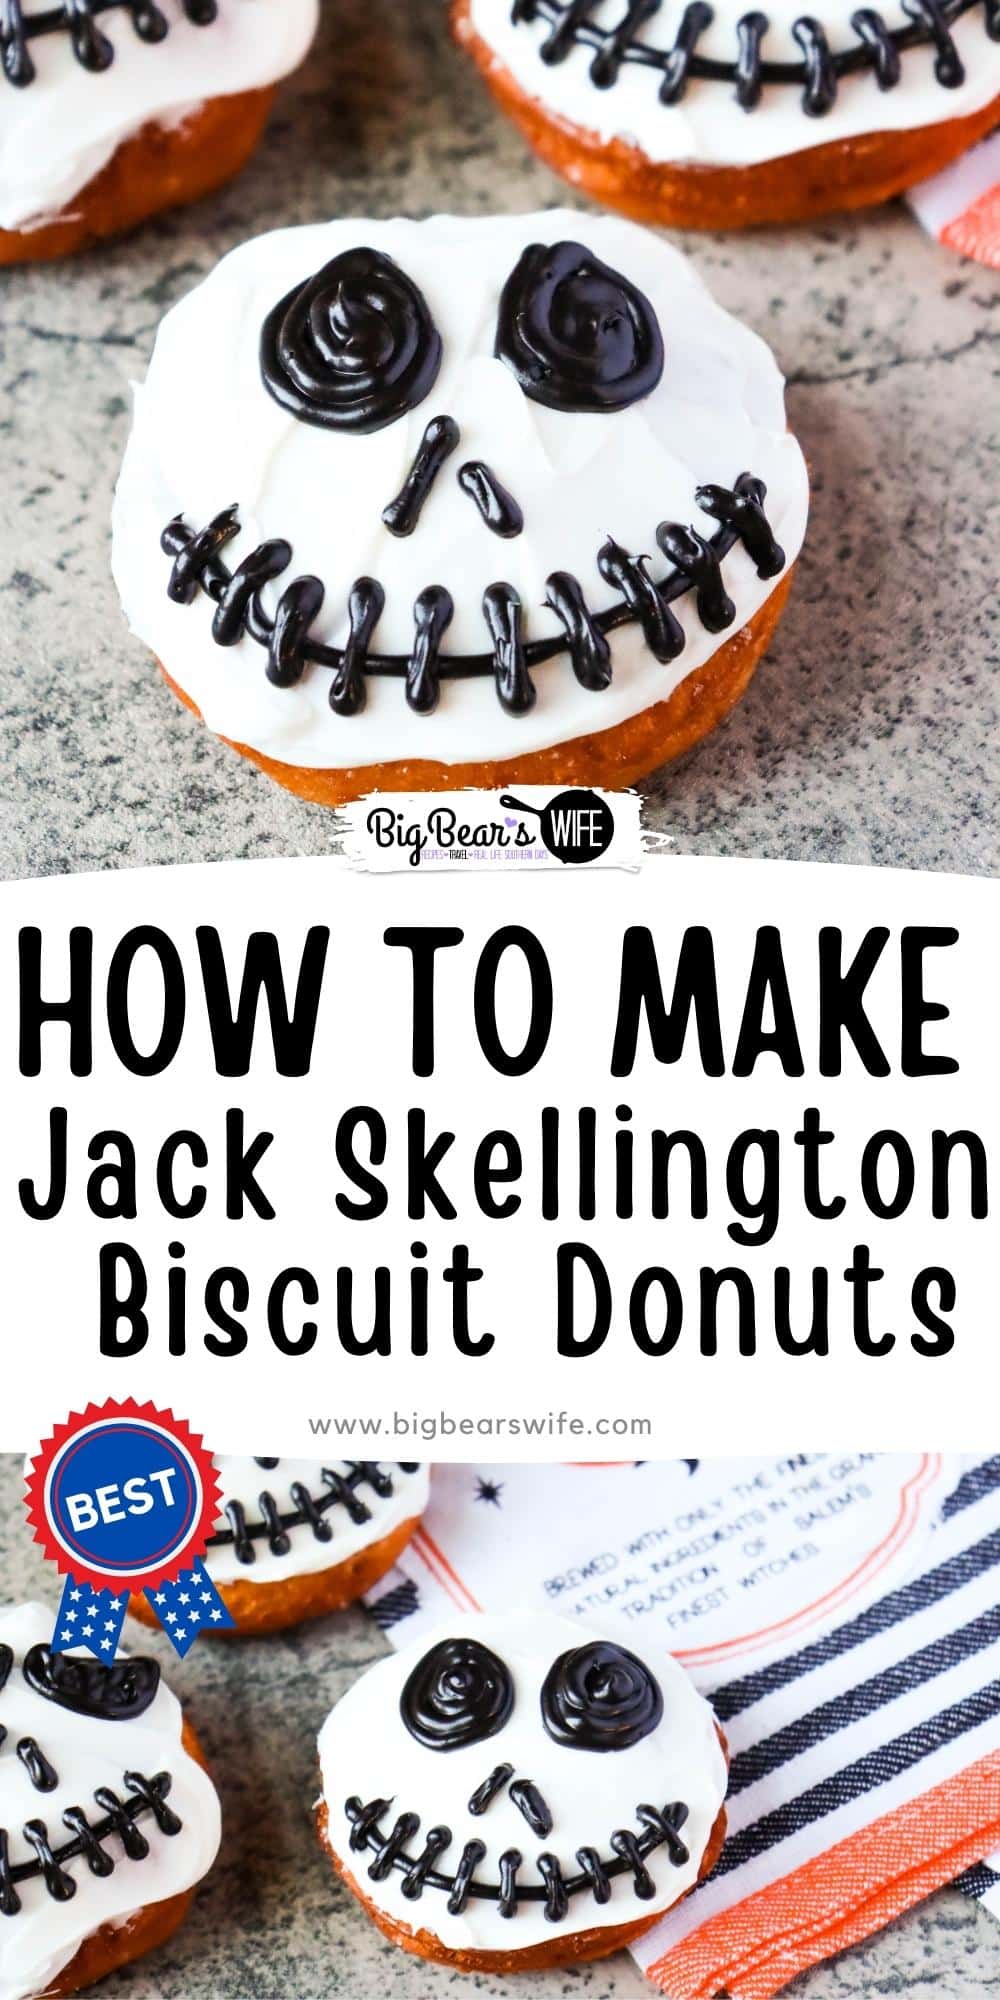 These Jack Skellington Biscuit Donuts are made with canned biscuits and fried until golden brown, before being decorated to look like Disney's Jack Skellington with frosting.  via @bigbearswife